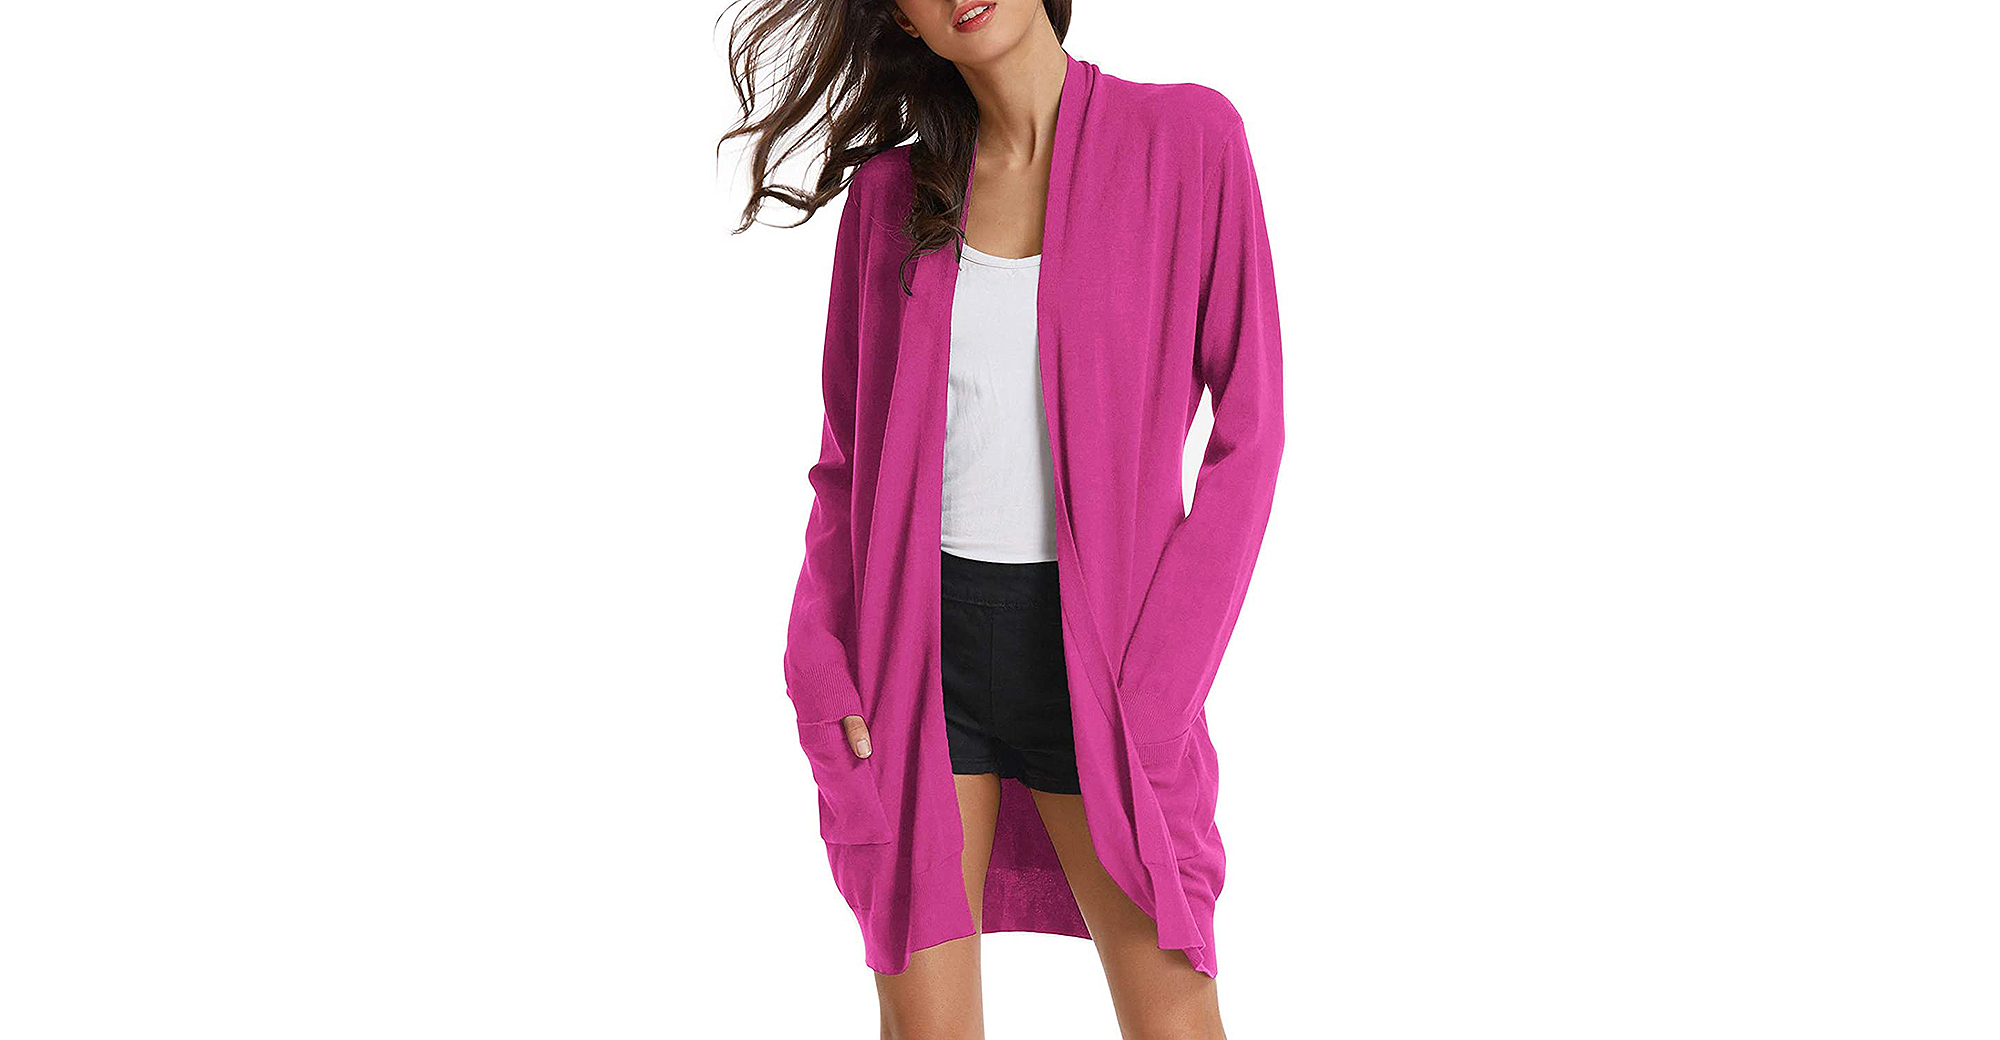 Viva Magenta: Rock the Color of 2023 With This Cardigan